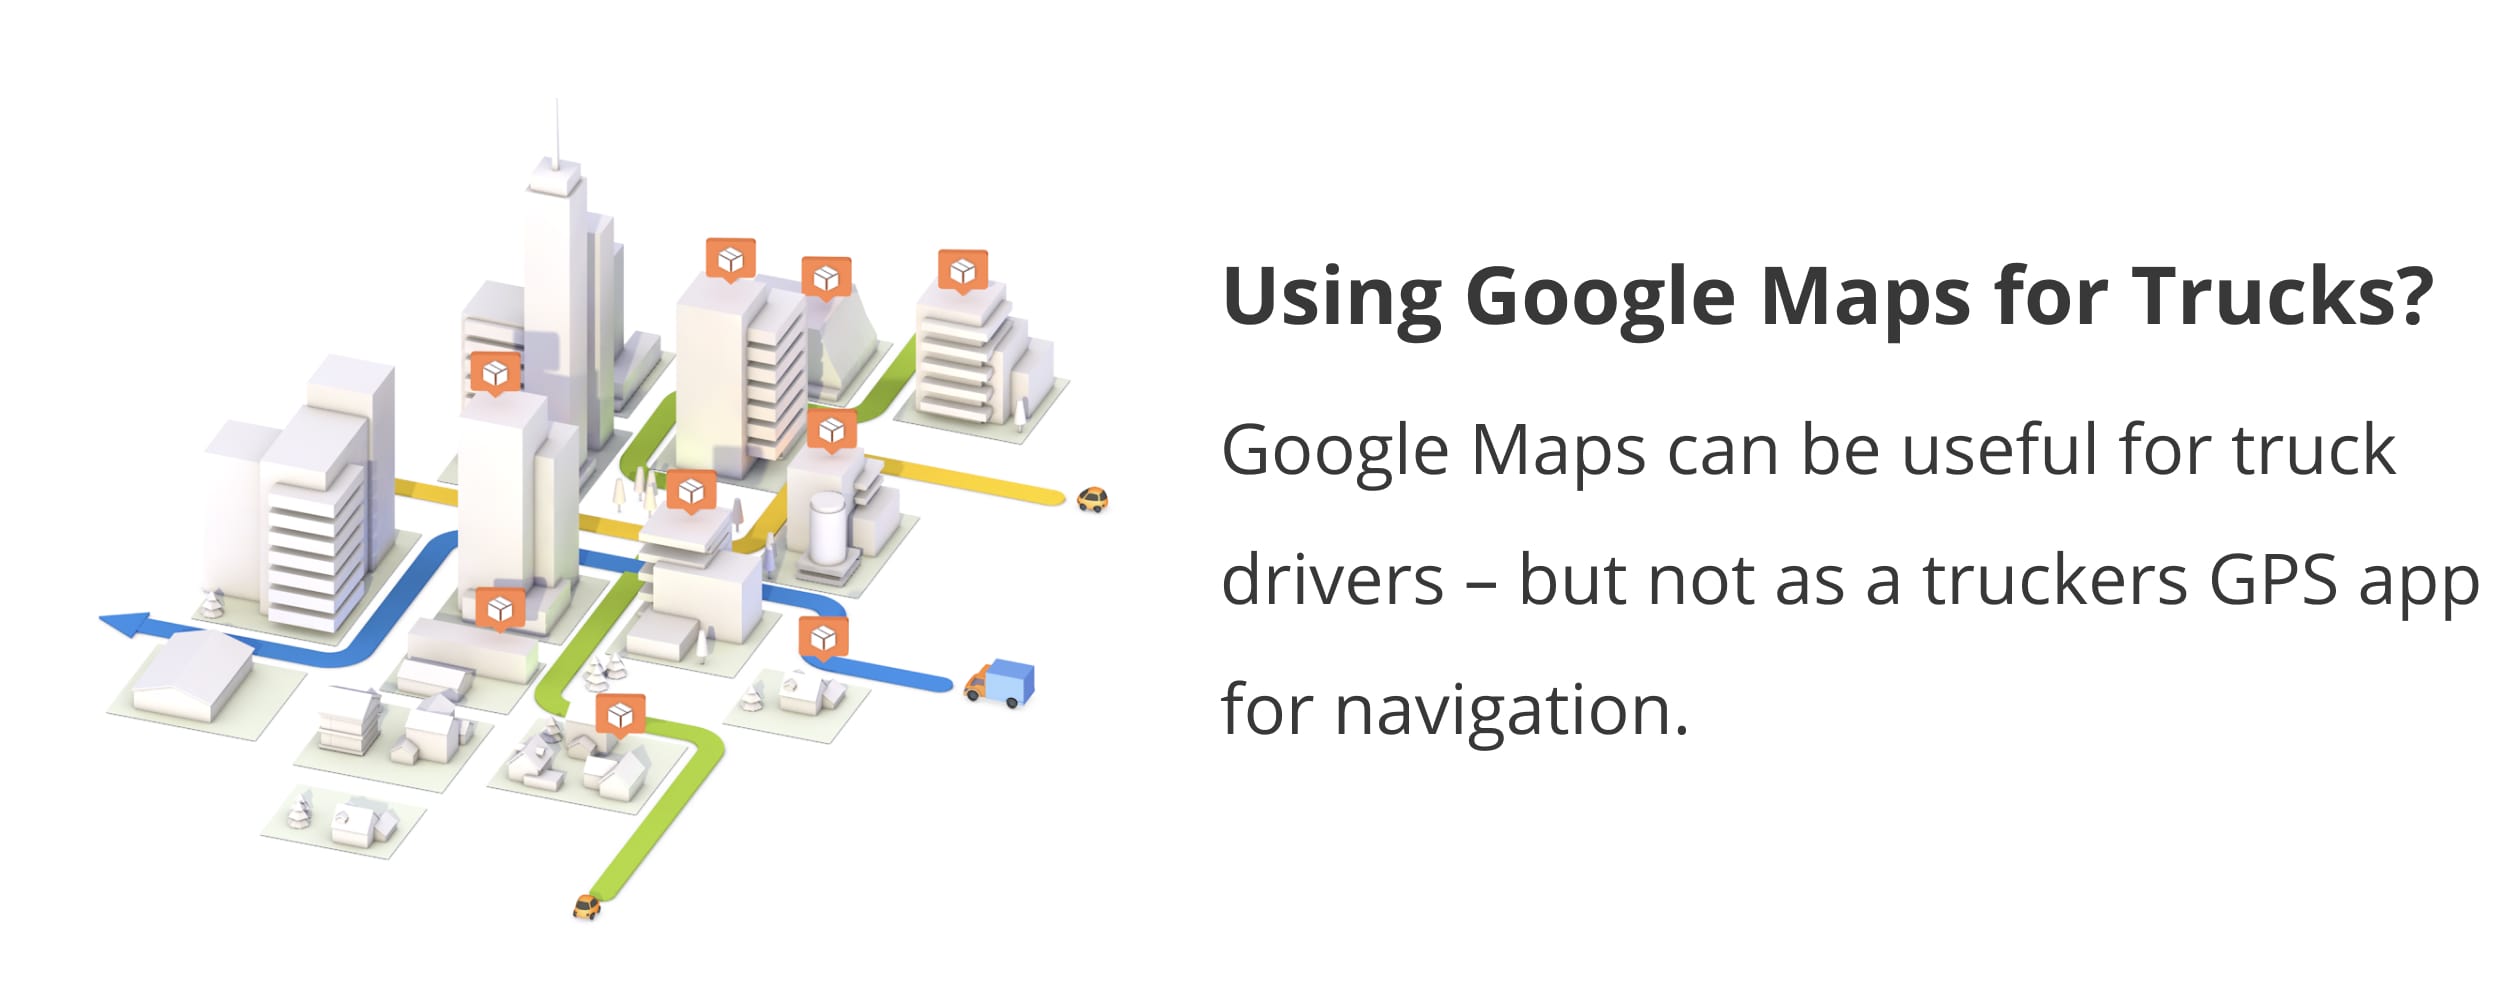 How Google Maps is useful for truck drivers and why the route mapping app should not be used for truck navigation.